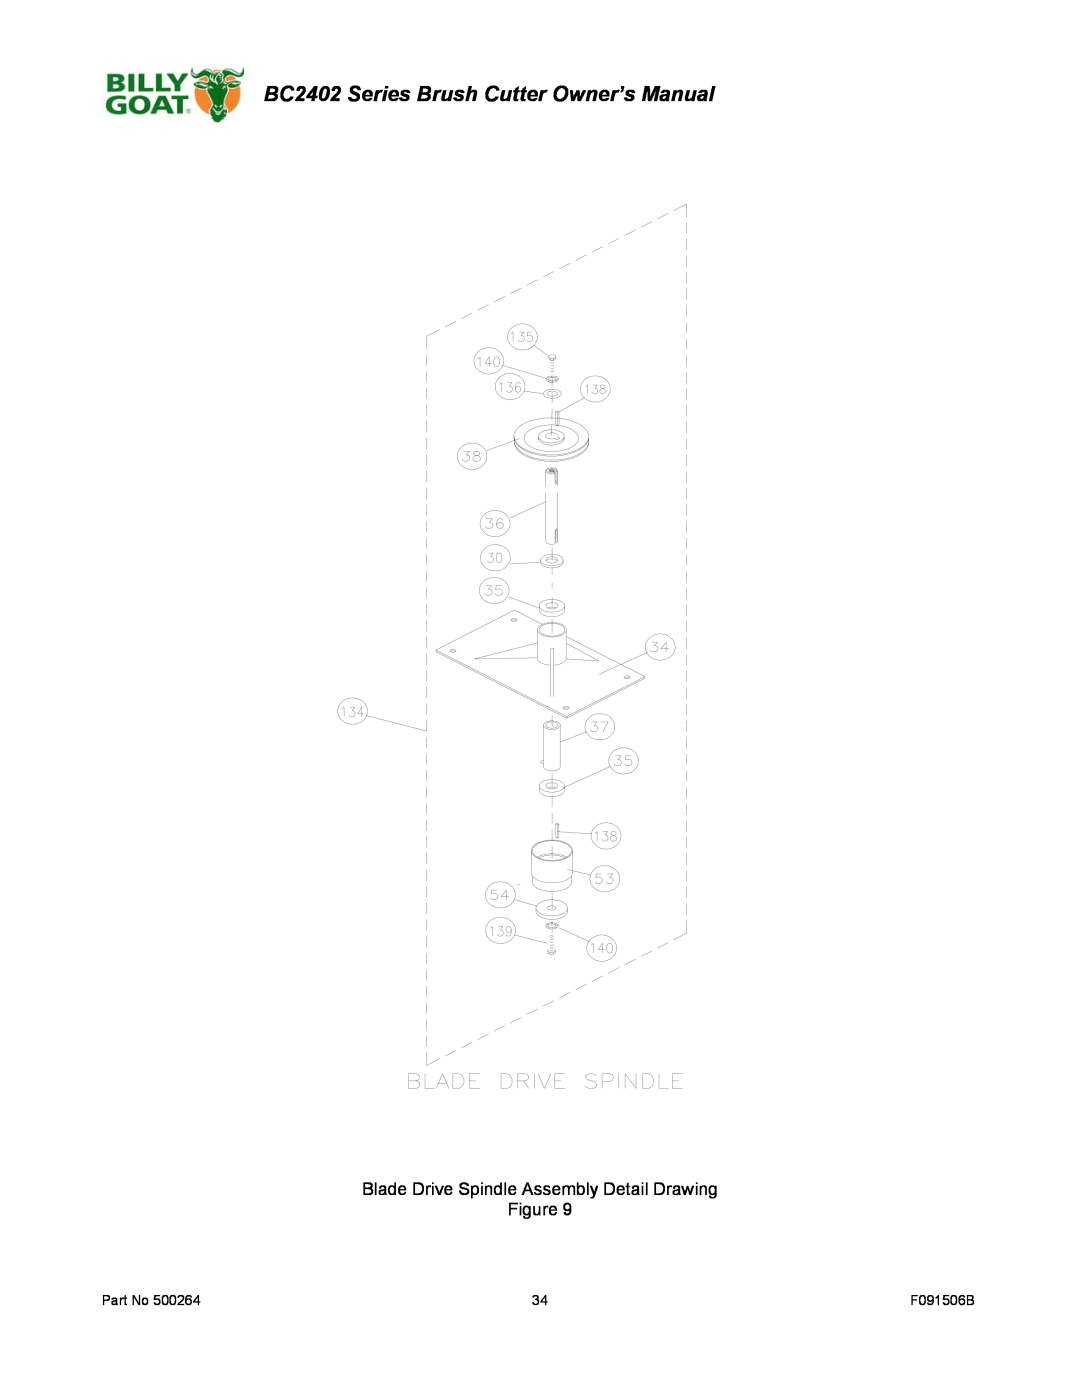 Billy Goat BC2402 owner manual Blade Drive Spindle Assembly Detail Drawing 